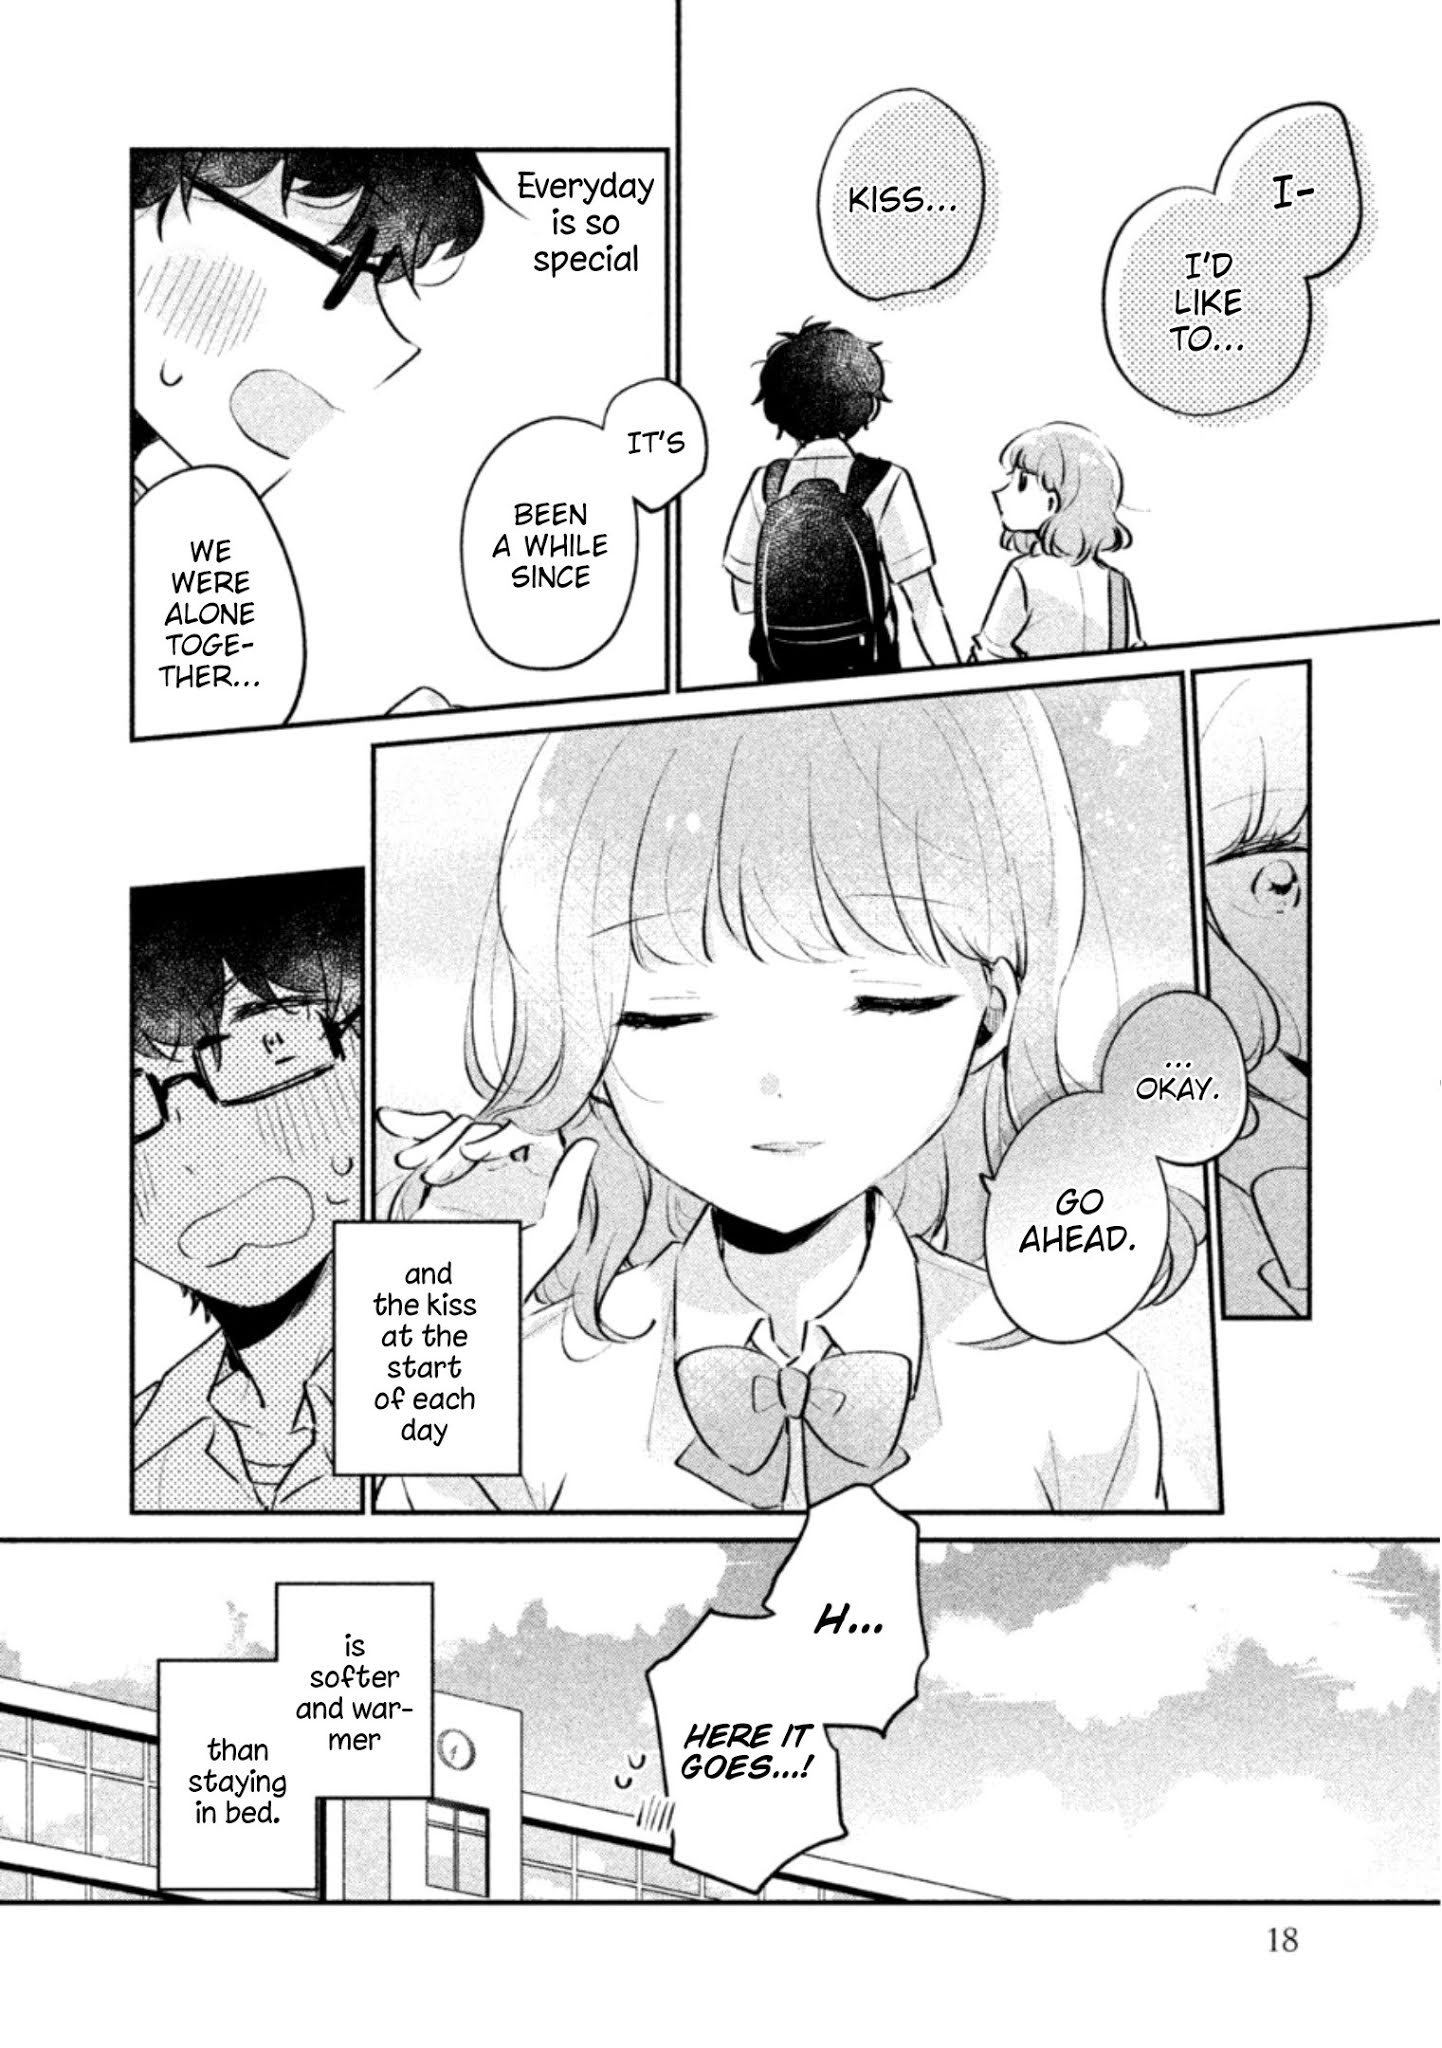 It's Not Meguro-san's First Time chapter 18 page 15